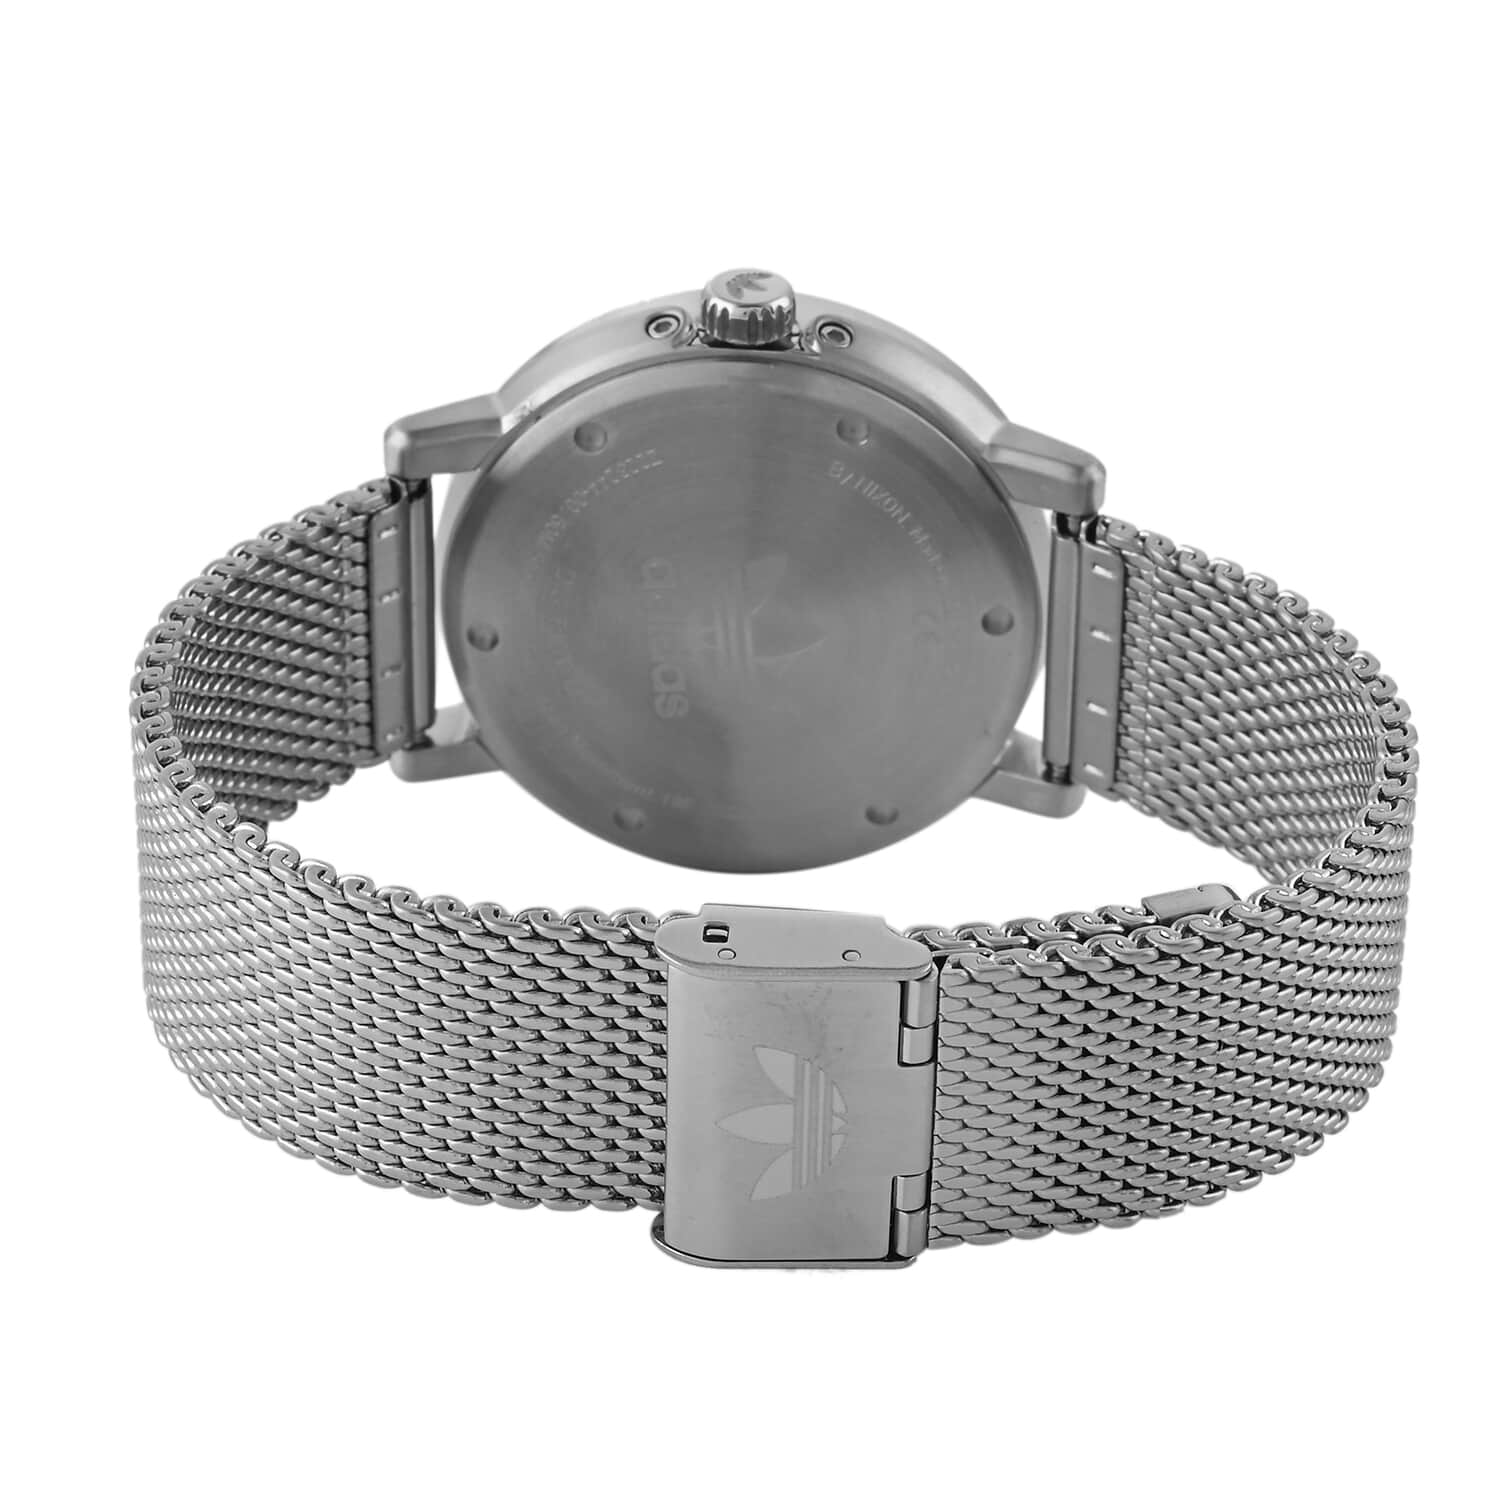 ADIDAS Japanese Quartz Movement Watch in Stainless Steel (40mm)